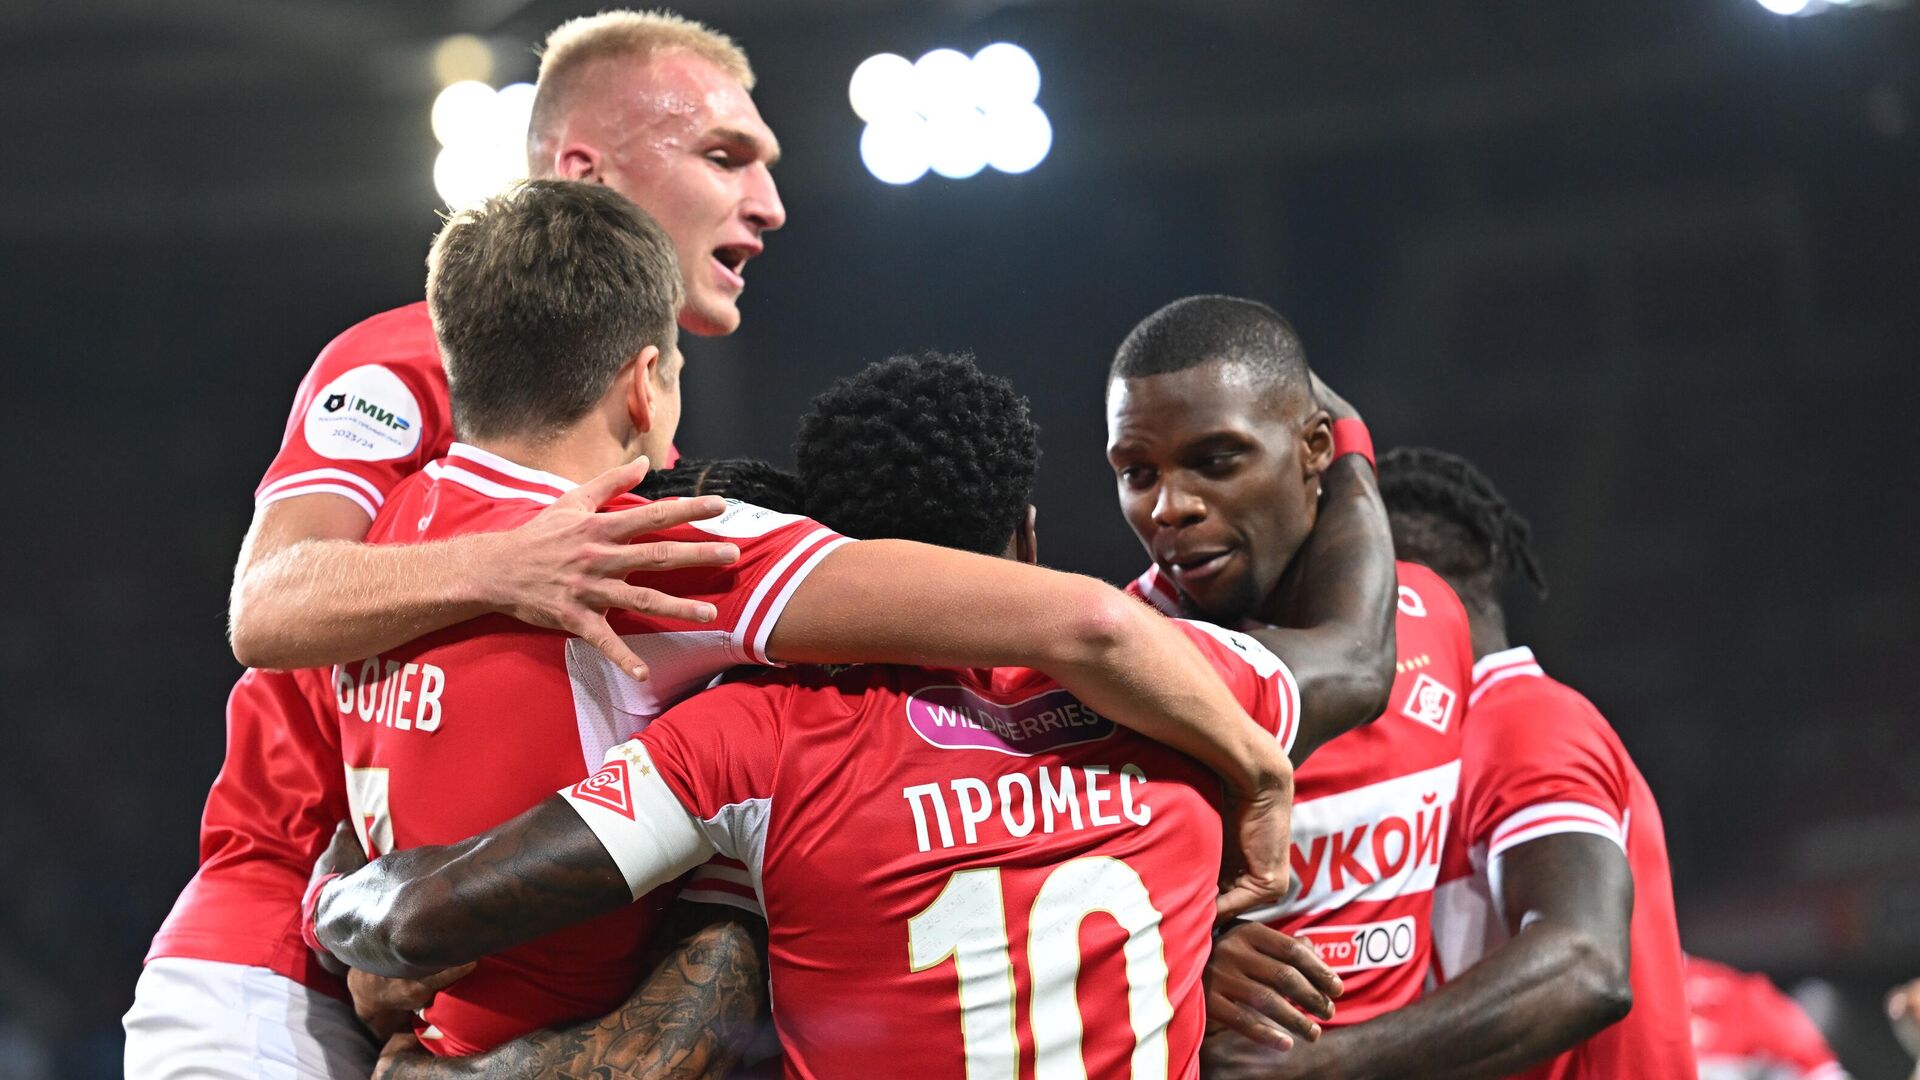 “Dinamo” was better in the derby.  But Spartak wanted to win more